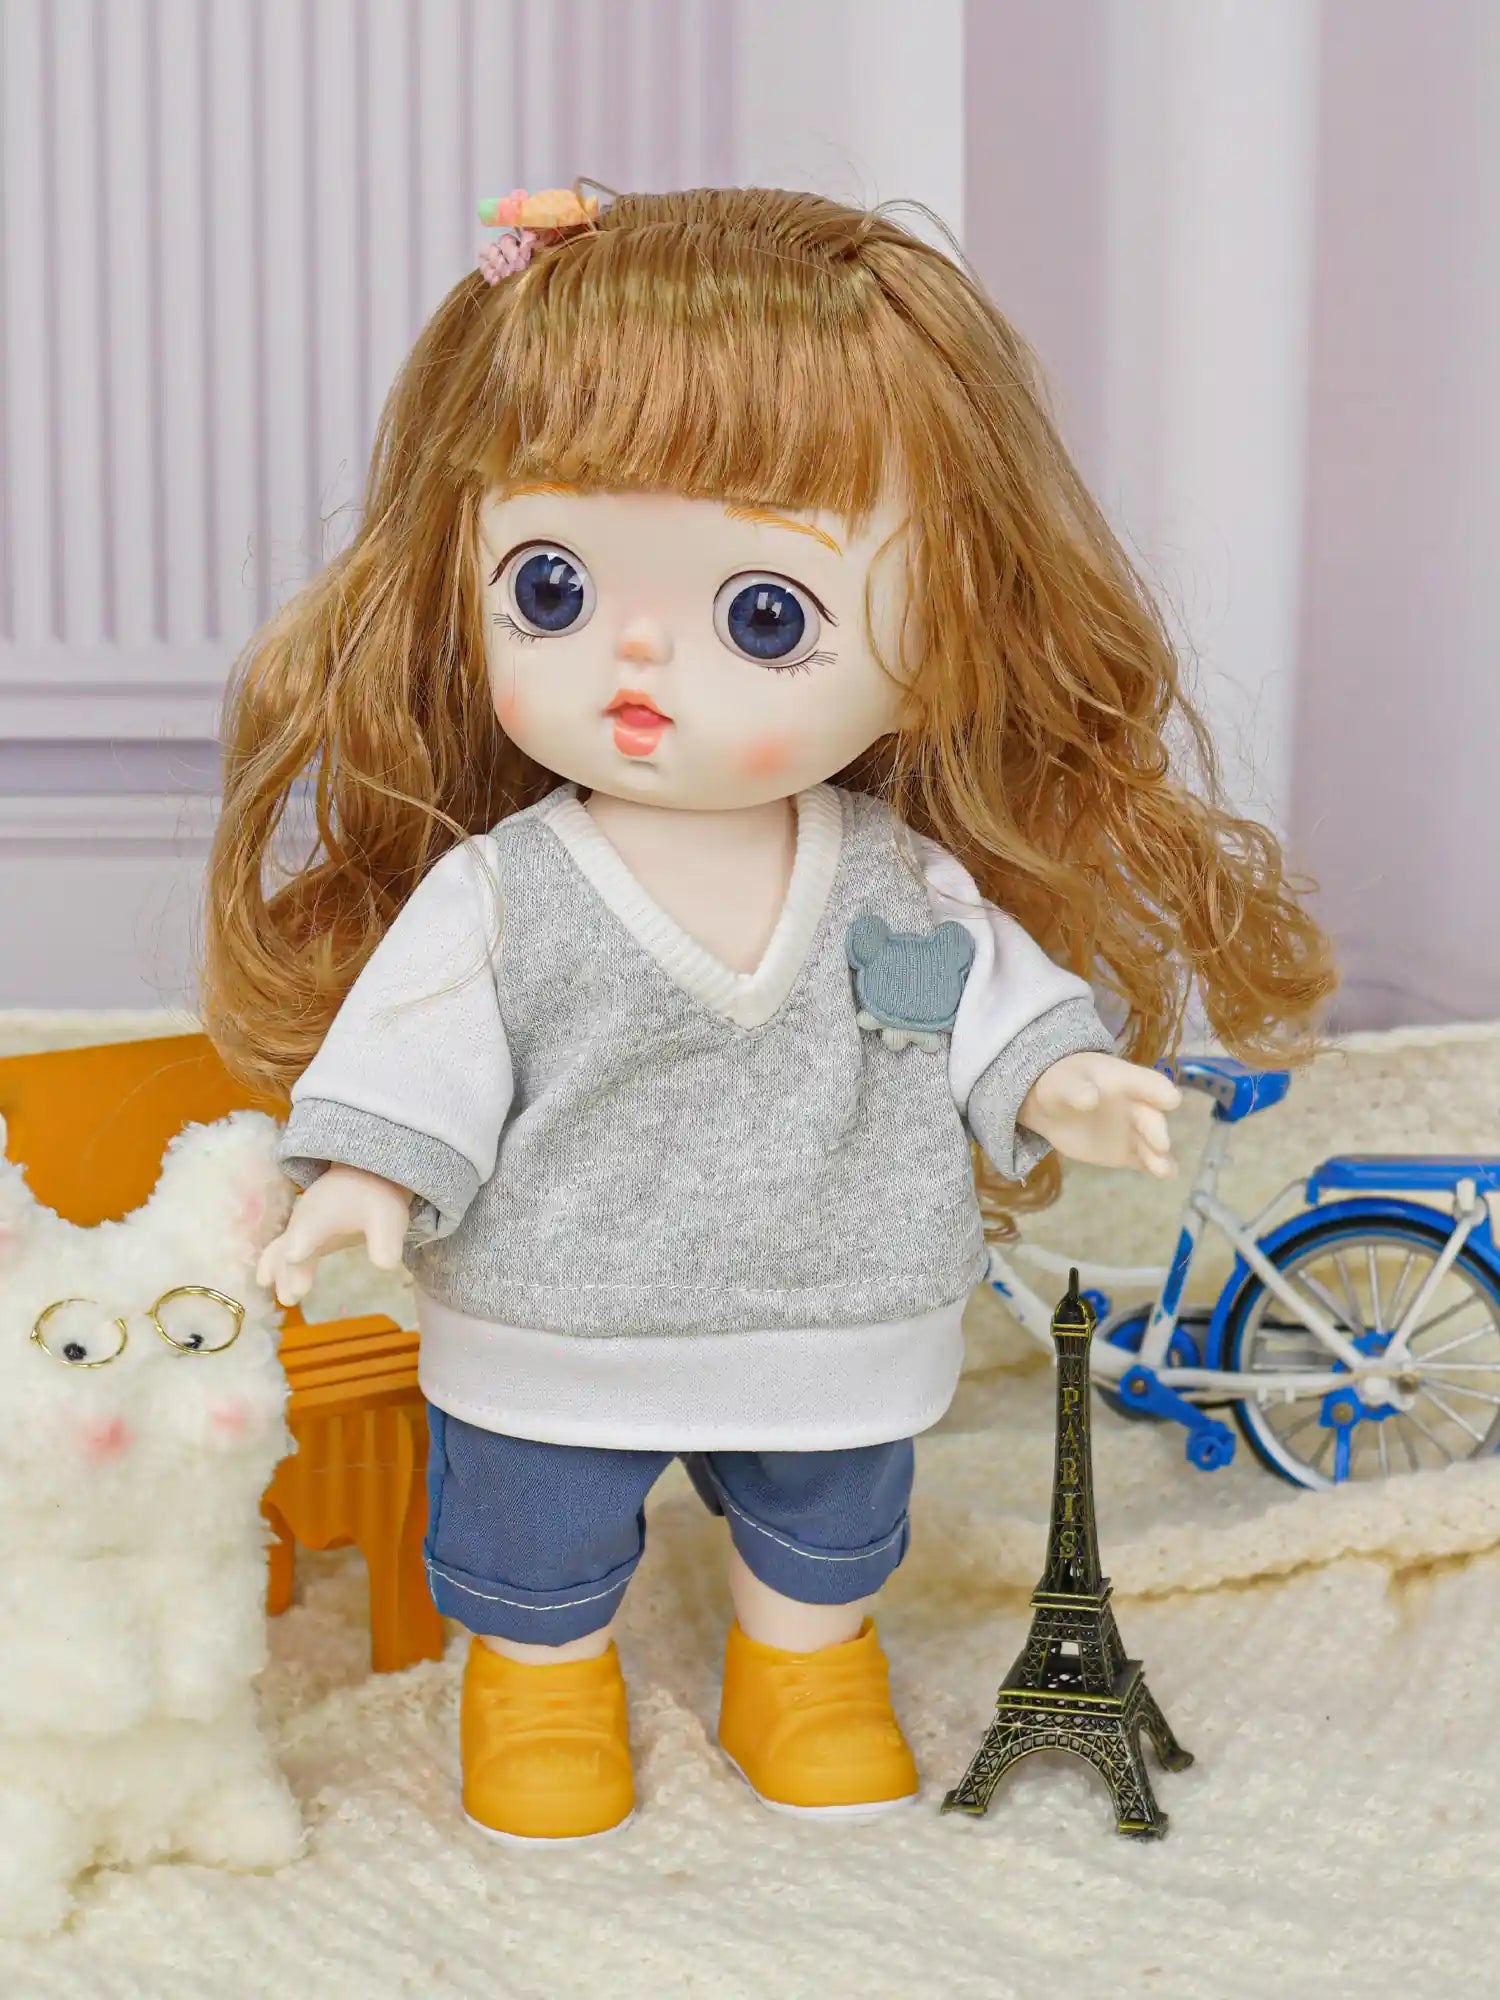 Cute doll in modern attire with a pet plush, against a backdrop of miniature furniture and a toy bike.